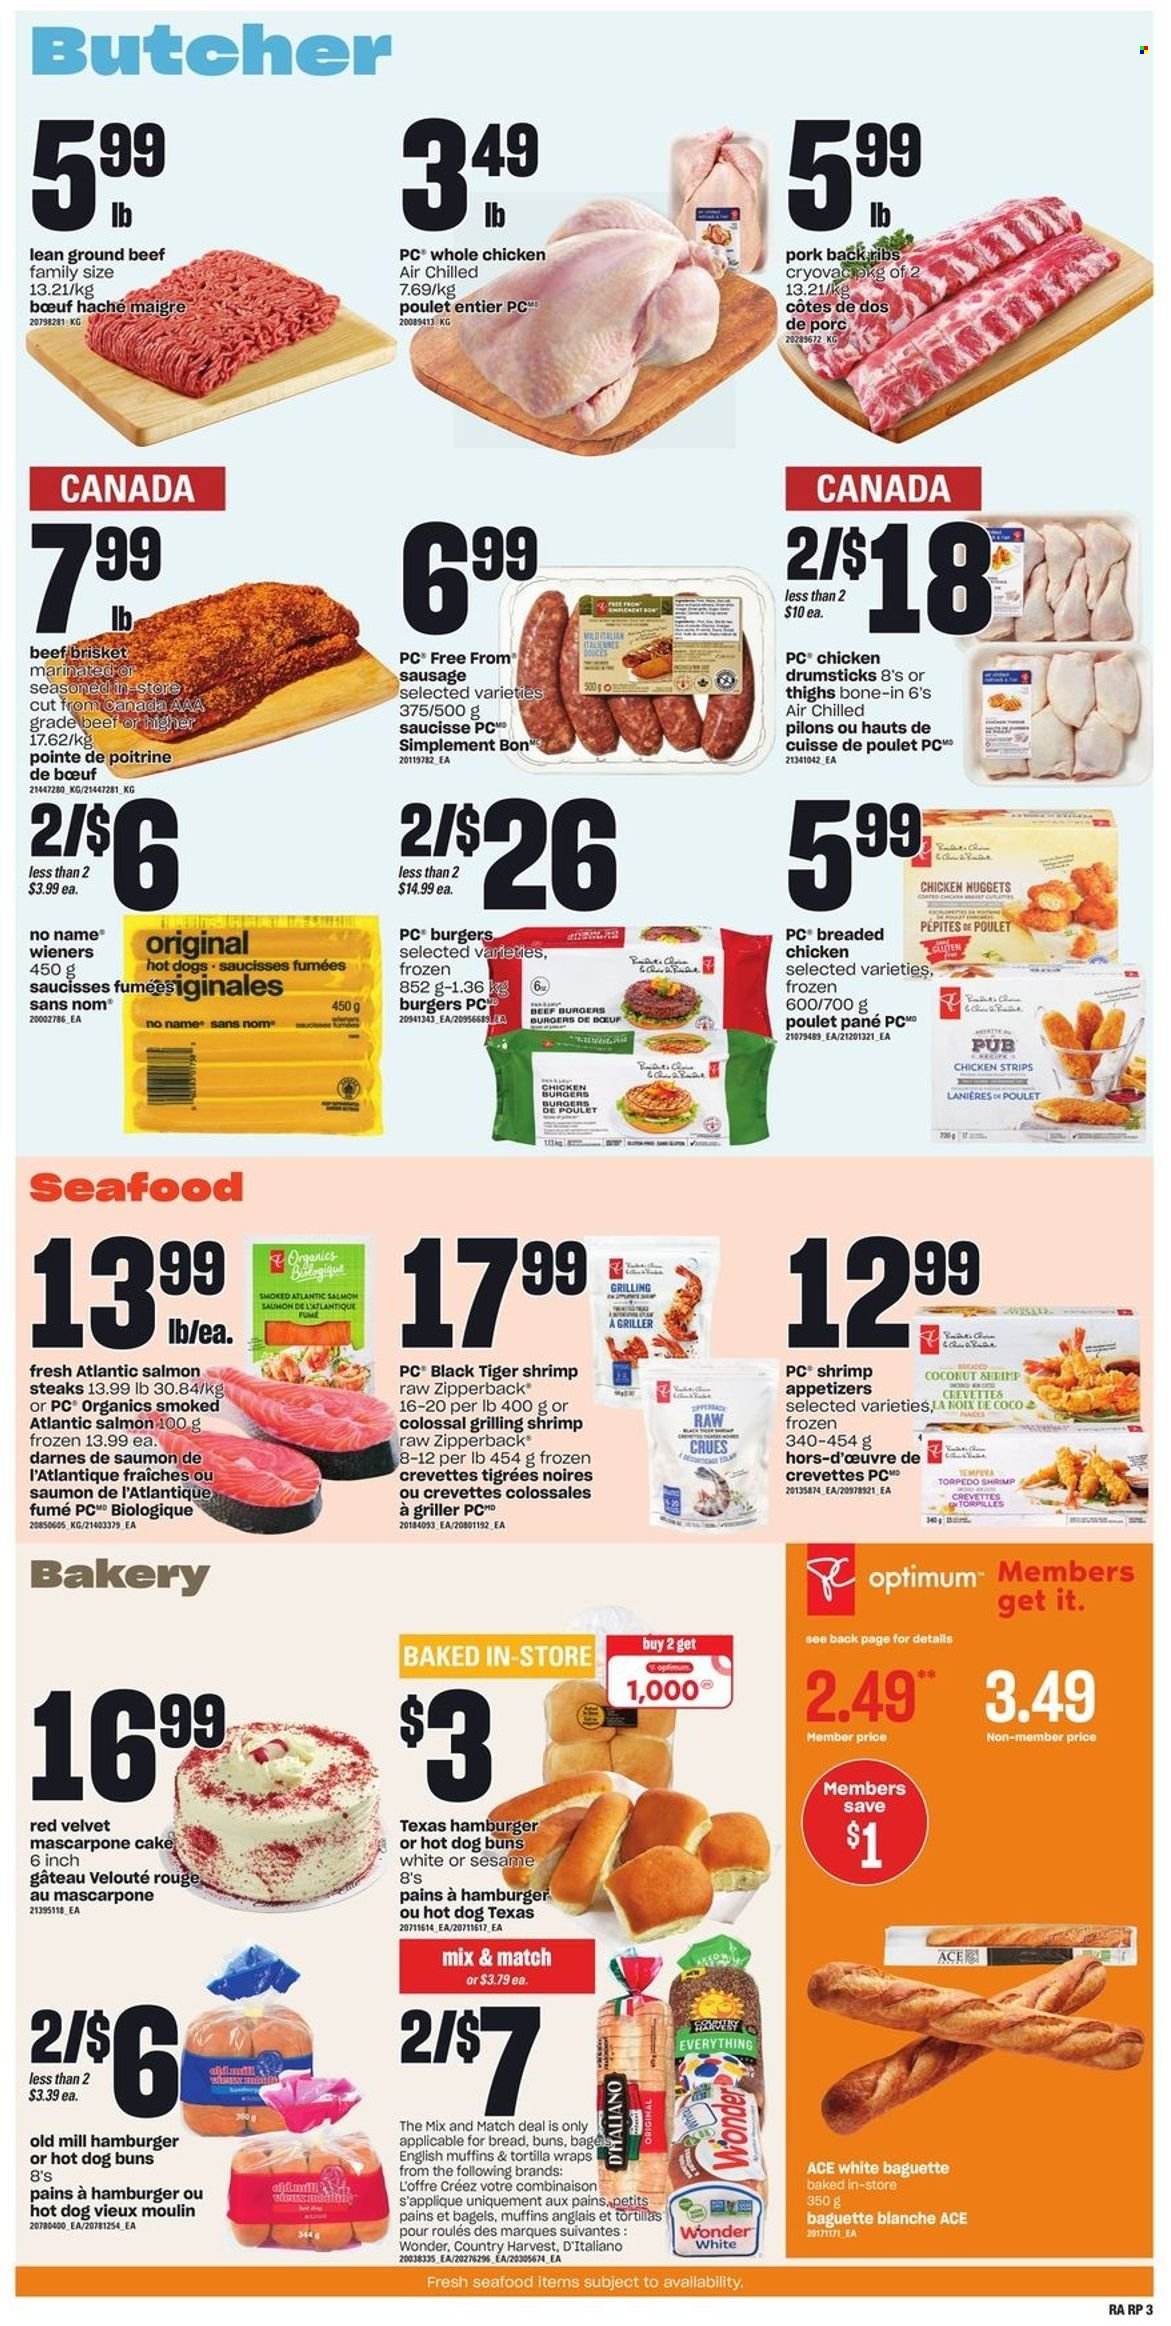 thumbnail - Atlantic Superstore Flyer - June 30, 2022 - July 06, 2022 - Sales products - bagels, english muffins, tortillas, cake, buns, wraps, salmon, seafood, shrimps, No Name, nuggets, fried chicken, chicken nuggets, beef burger, sausage, Country Harvest, strips, chicken strips, whole chicken, chicken drumsticks, chicken, beef meat, ground beef, beef brisket, pork meat, pork ribs, pork back ribs, Optimum, baguette, mascarpone, steak. Page 4.